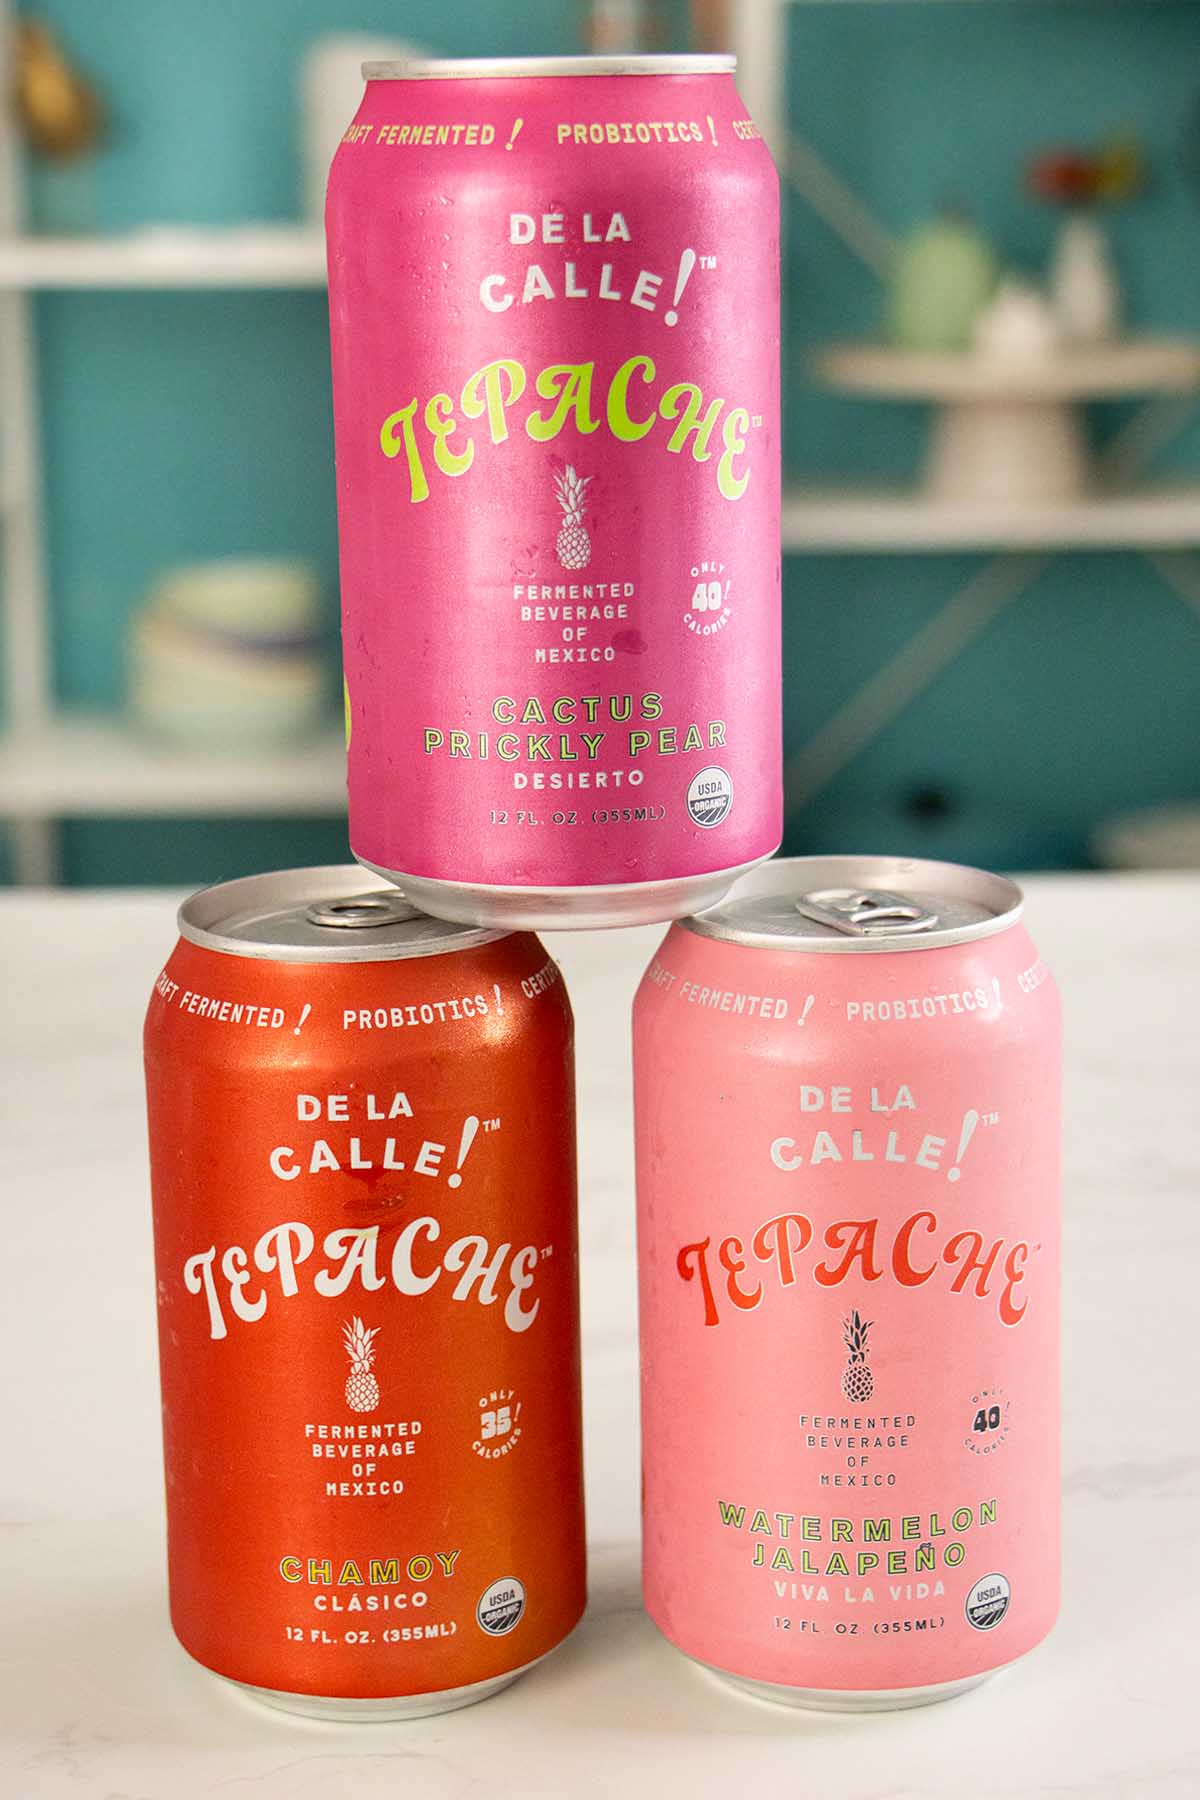 3 cans of De La Calle! Tepache on a white table: cactus prickly pear, chamoy, and watermelon jalapeño